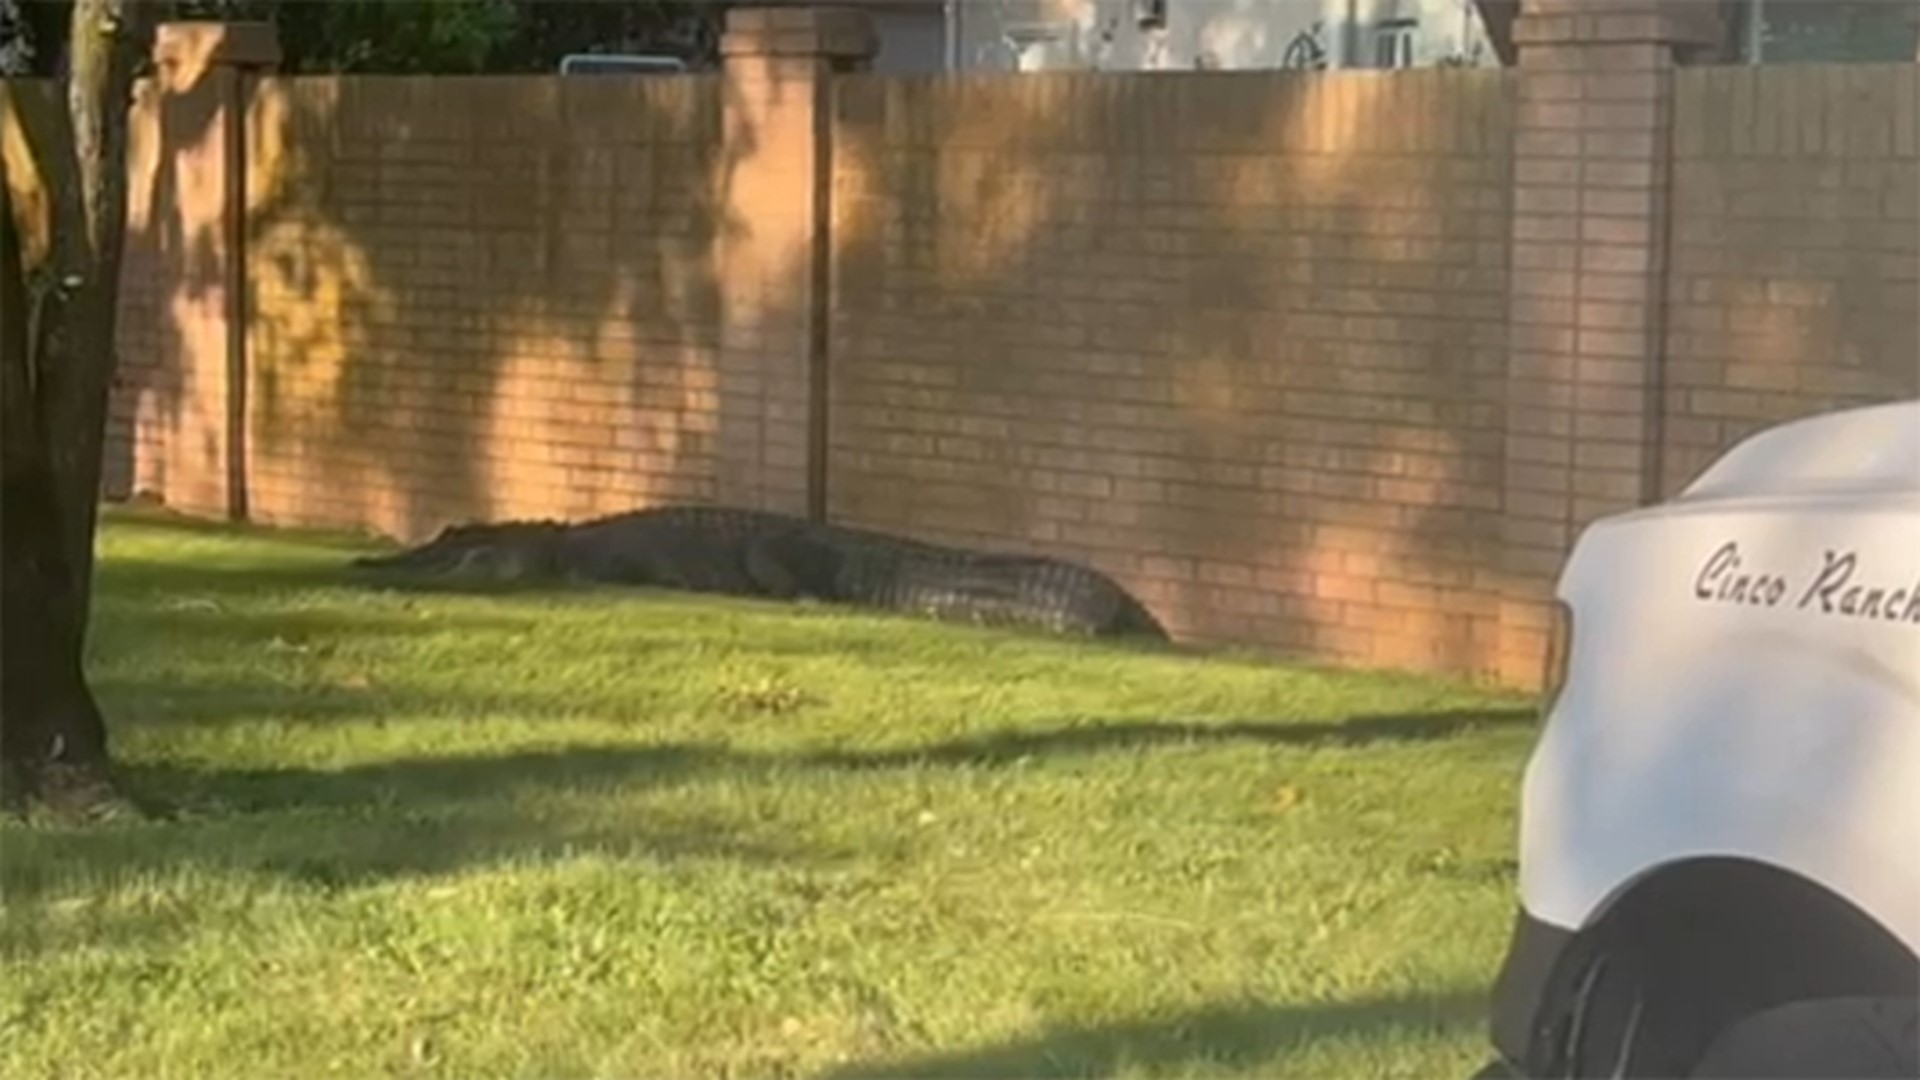 A large alligator, measuring 10 feet, 6 inches was captured walking around Cinco Ranch on Monday, September 12.